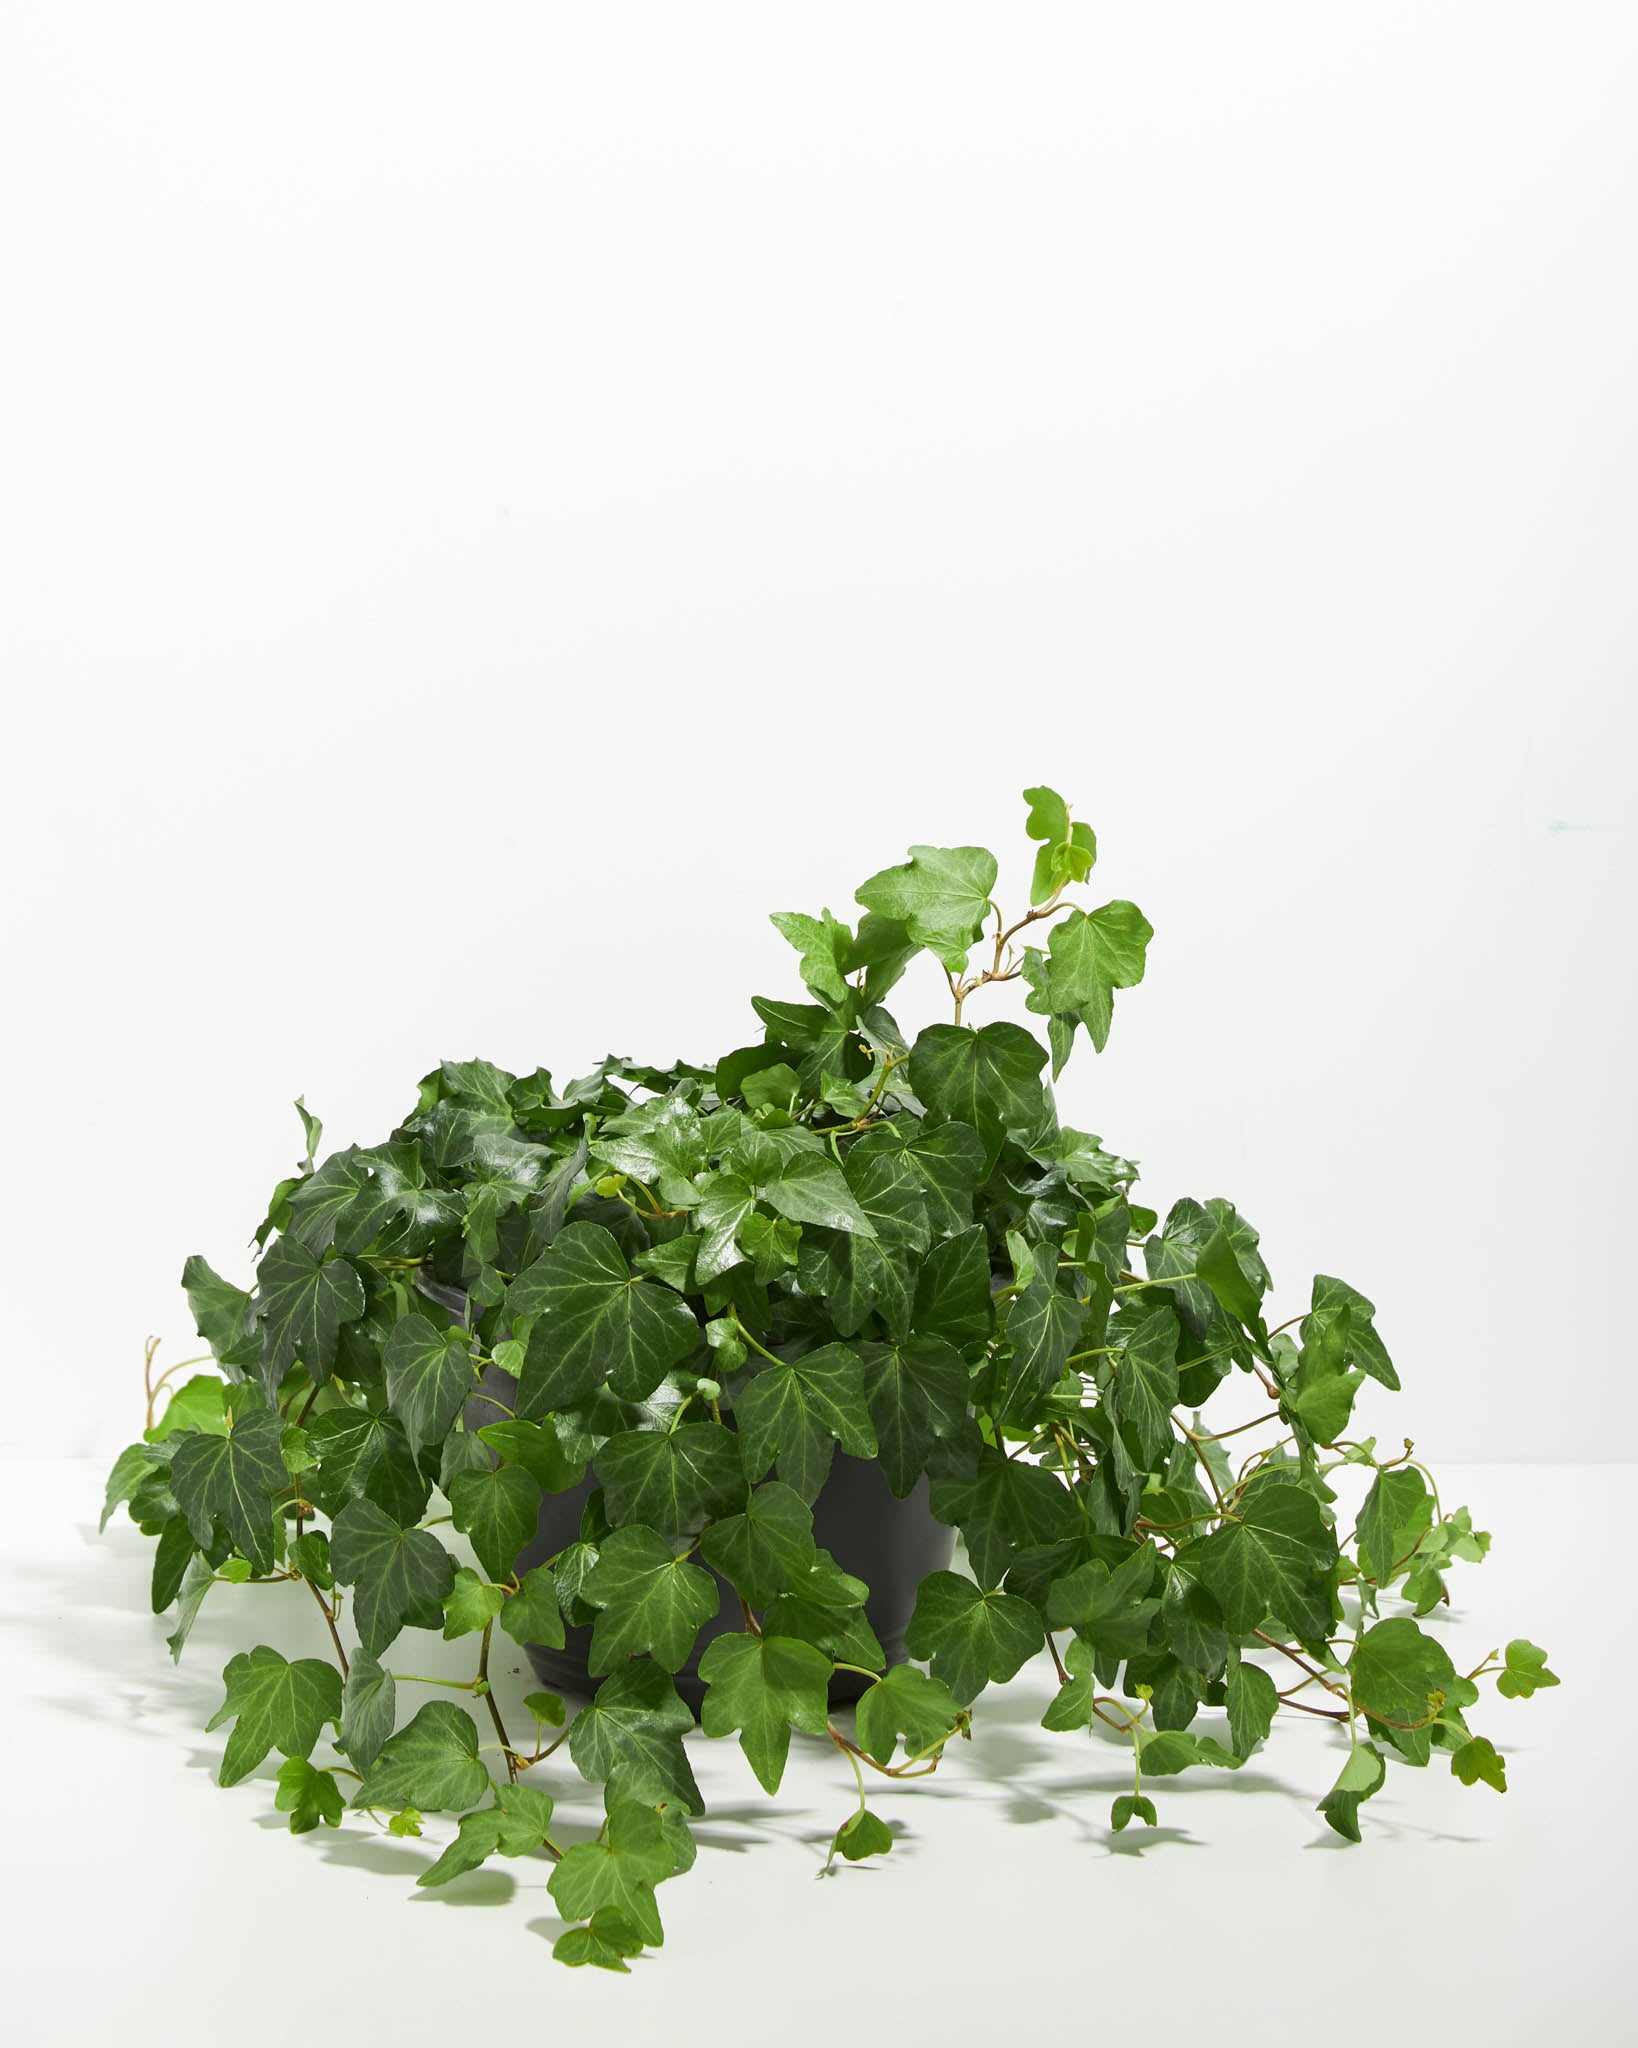 English Ivy For Sale (Hedera helix) Versatile Climbing Plant